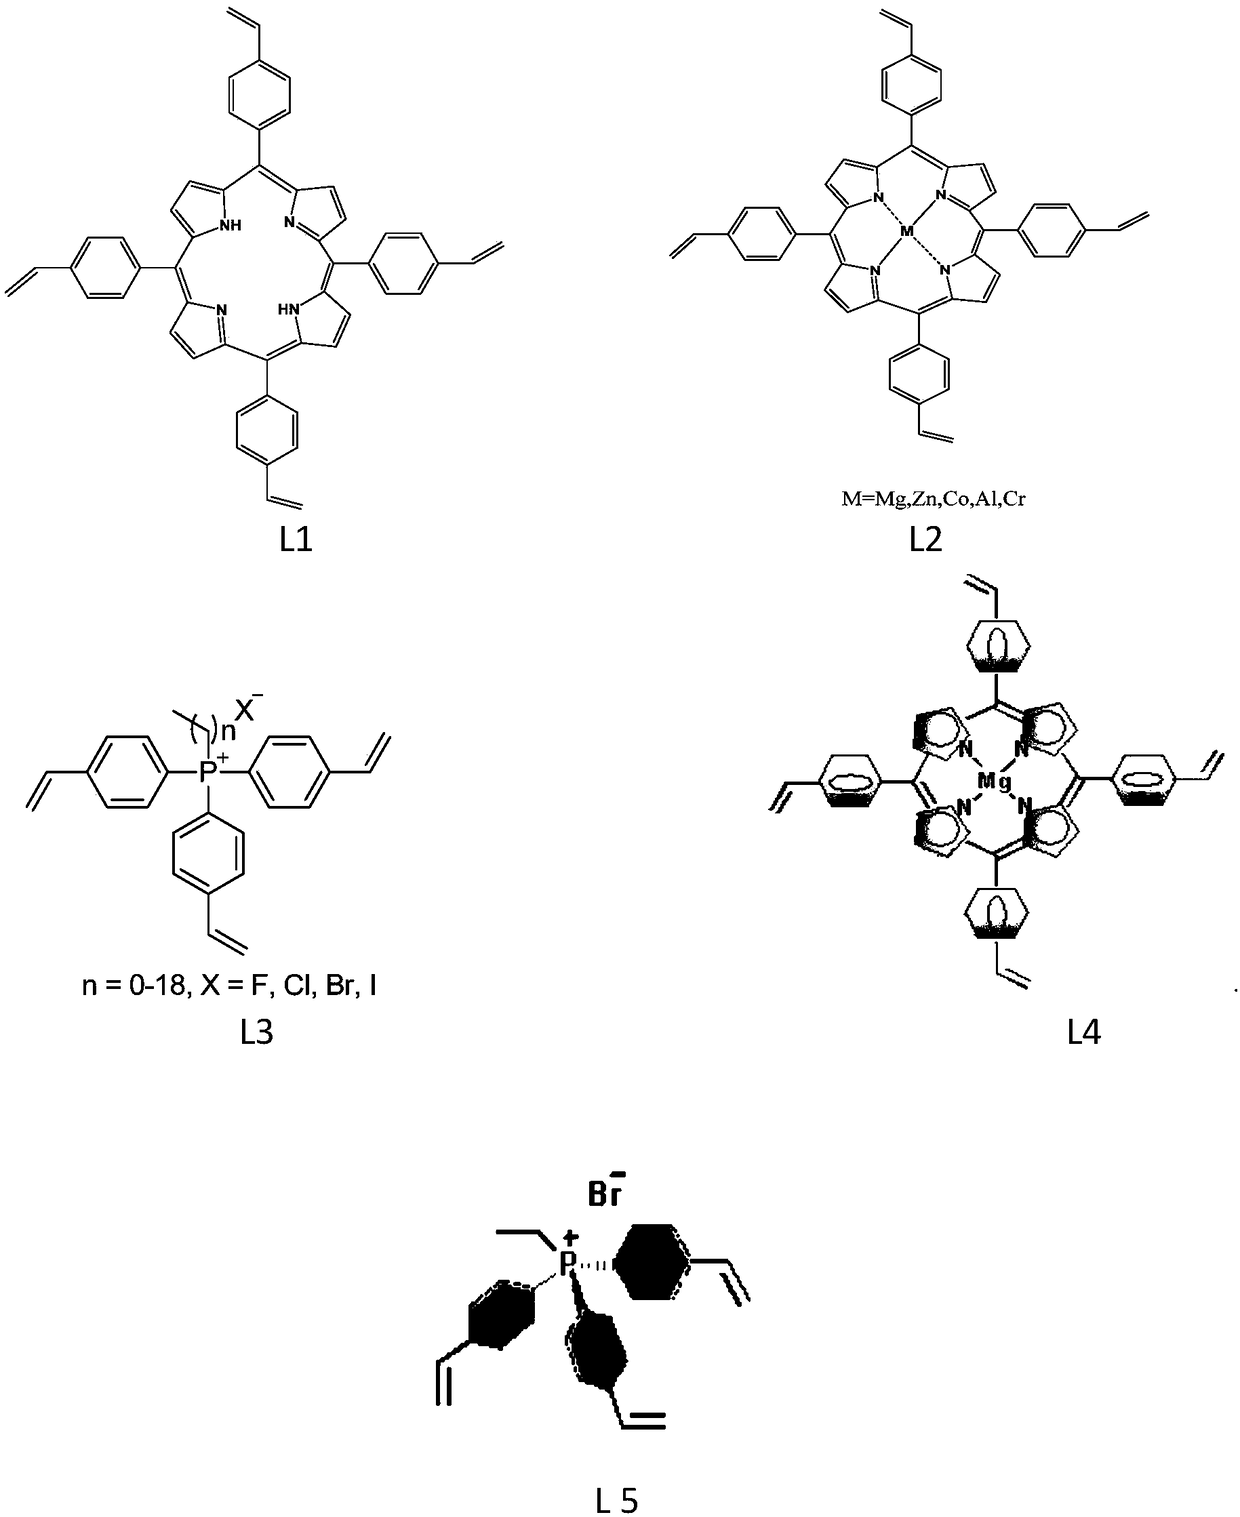 Production method and applications of cyclic carbonate